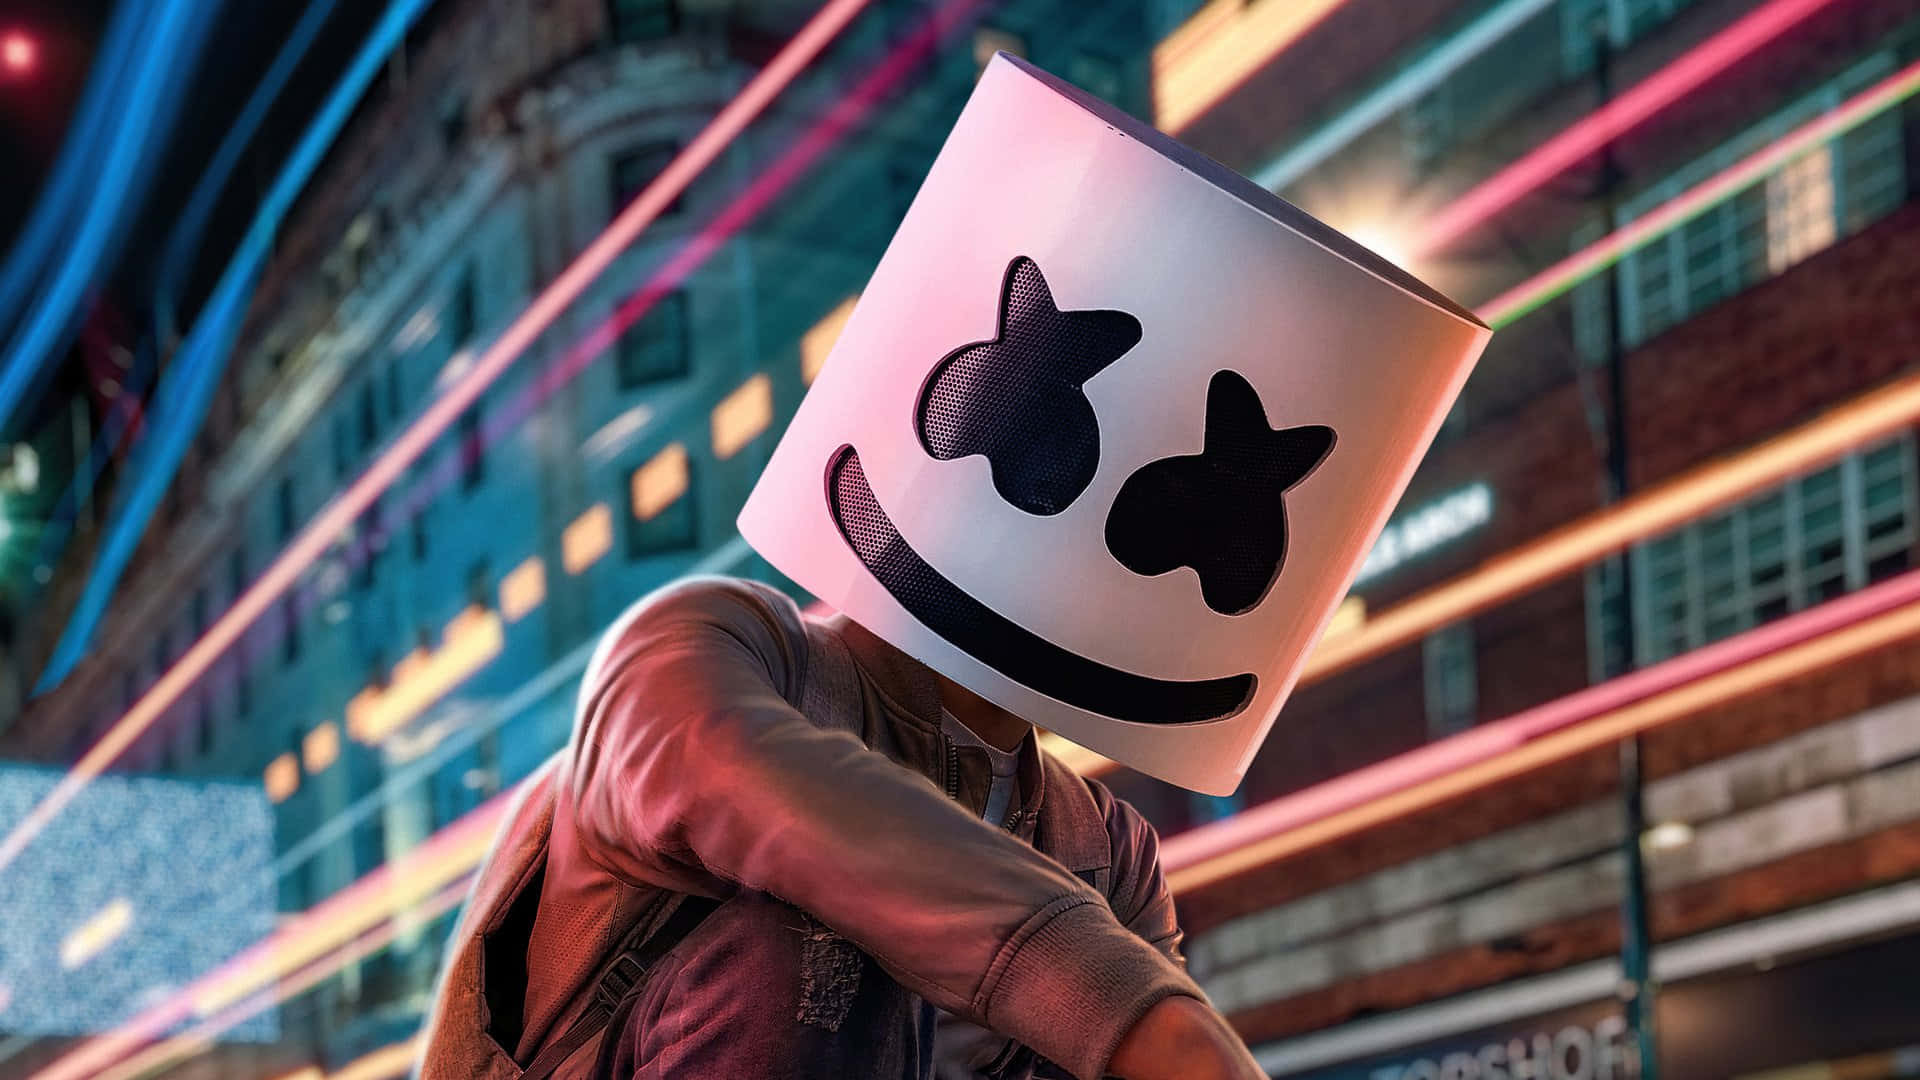 "Welcome to the Party!" - Marshmello